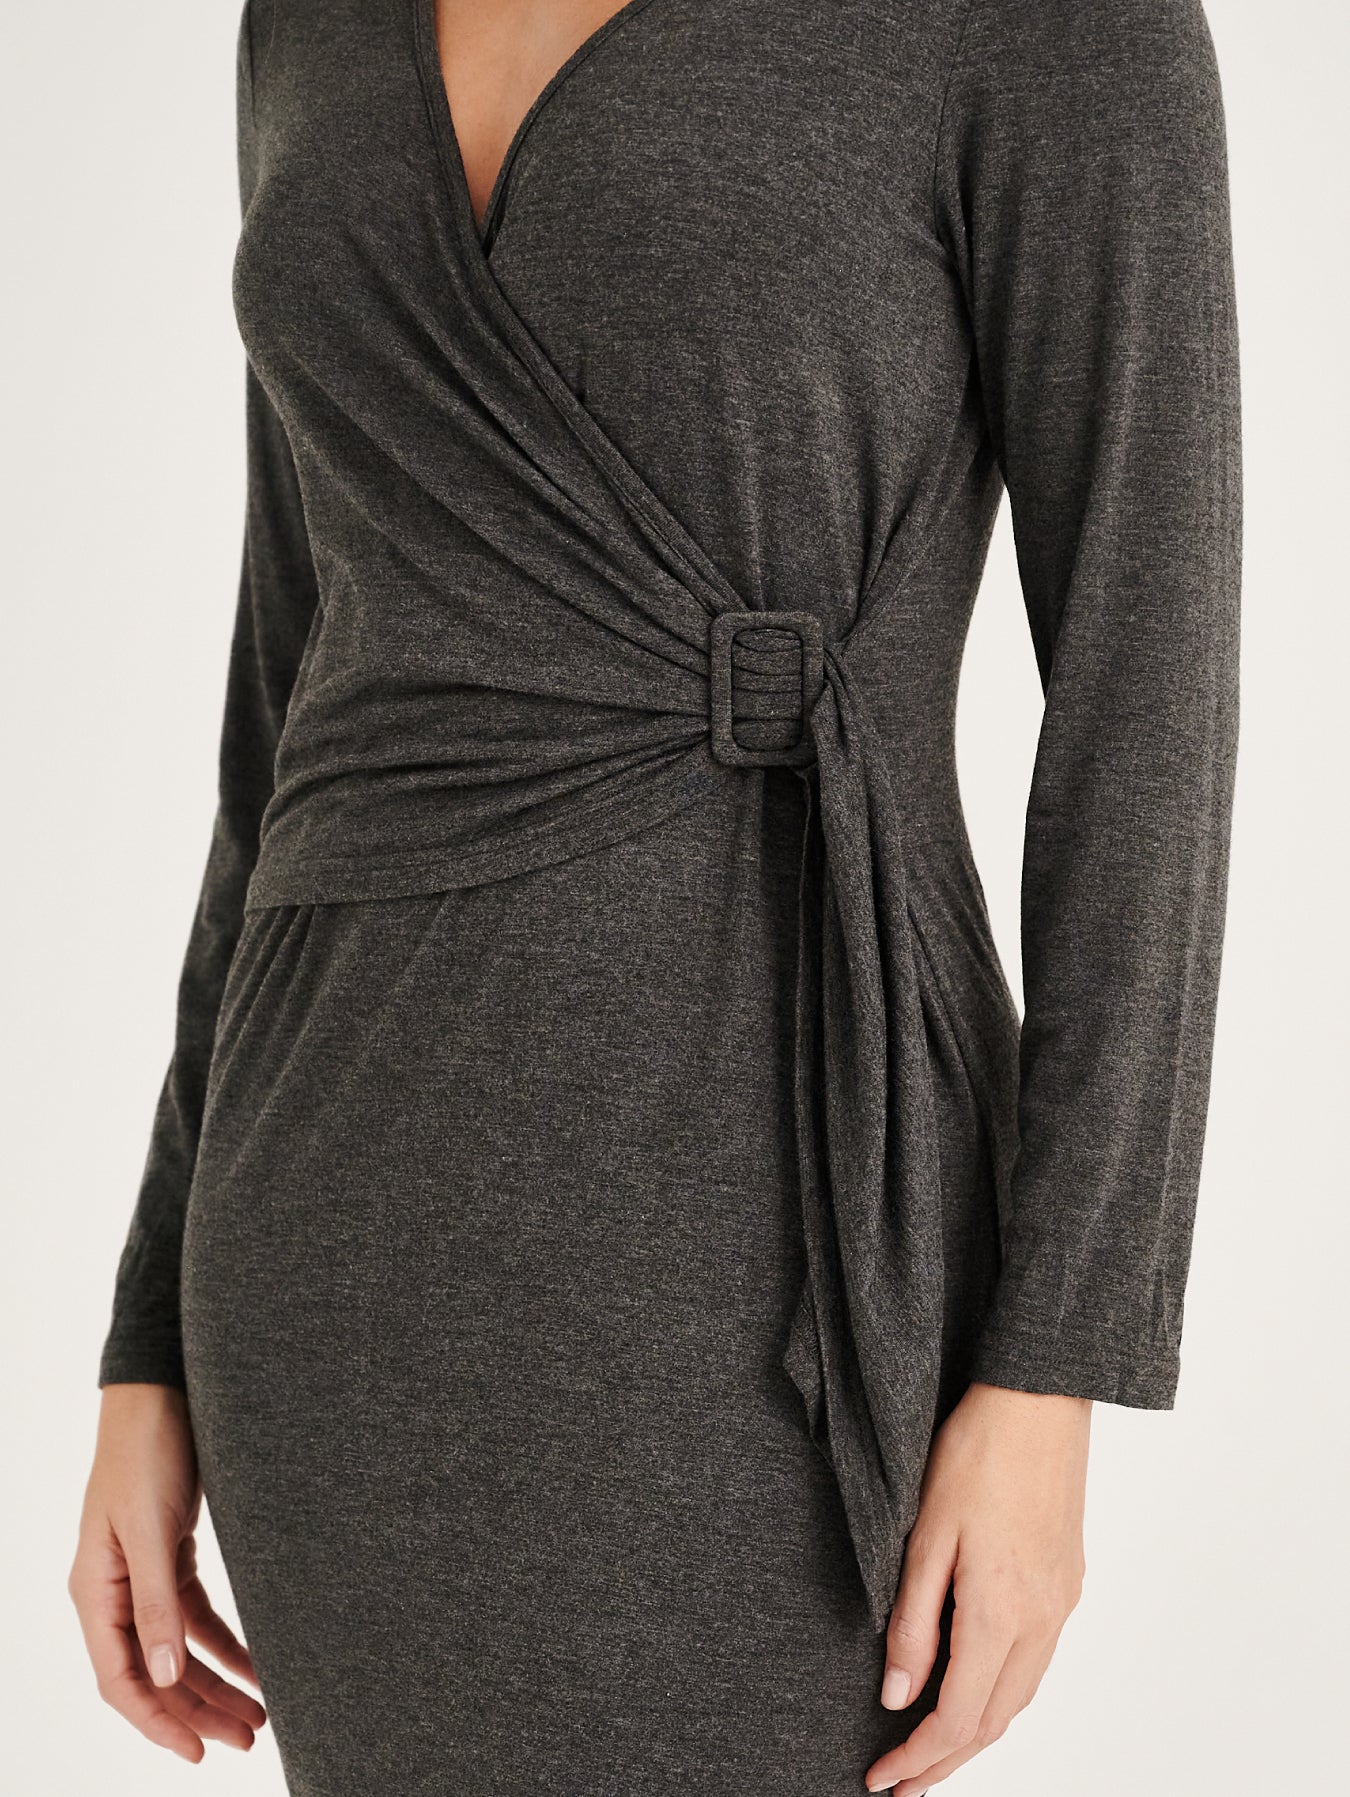 Comfortable and stylish dress for pregnant women